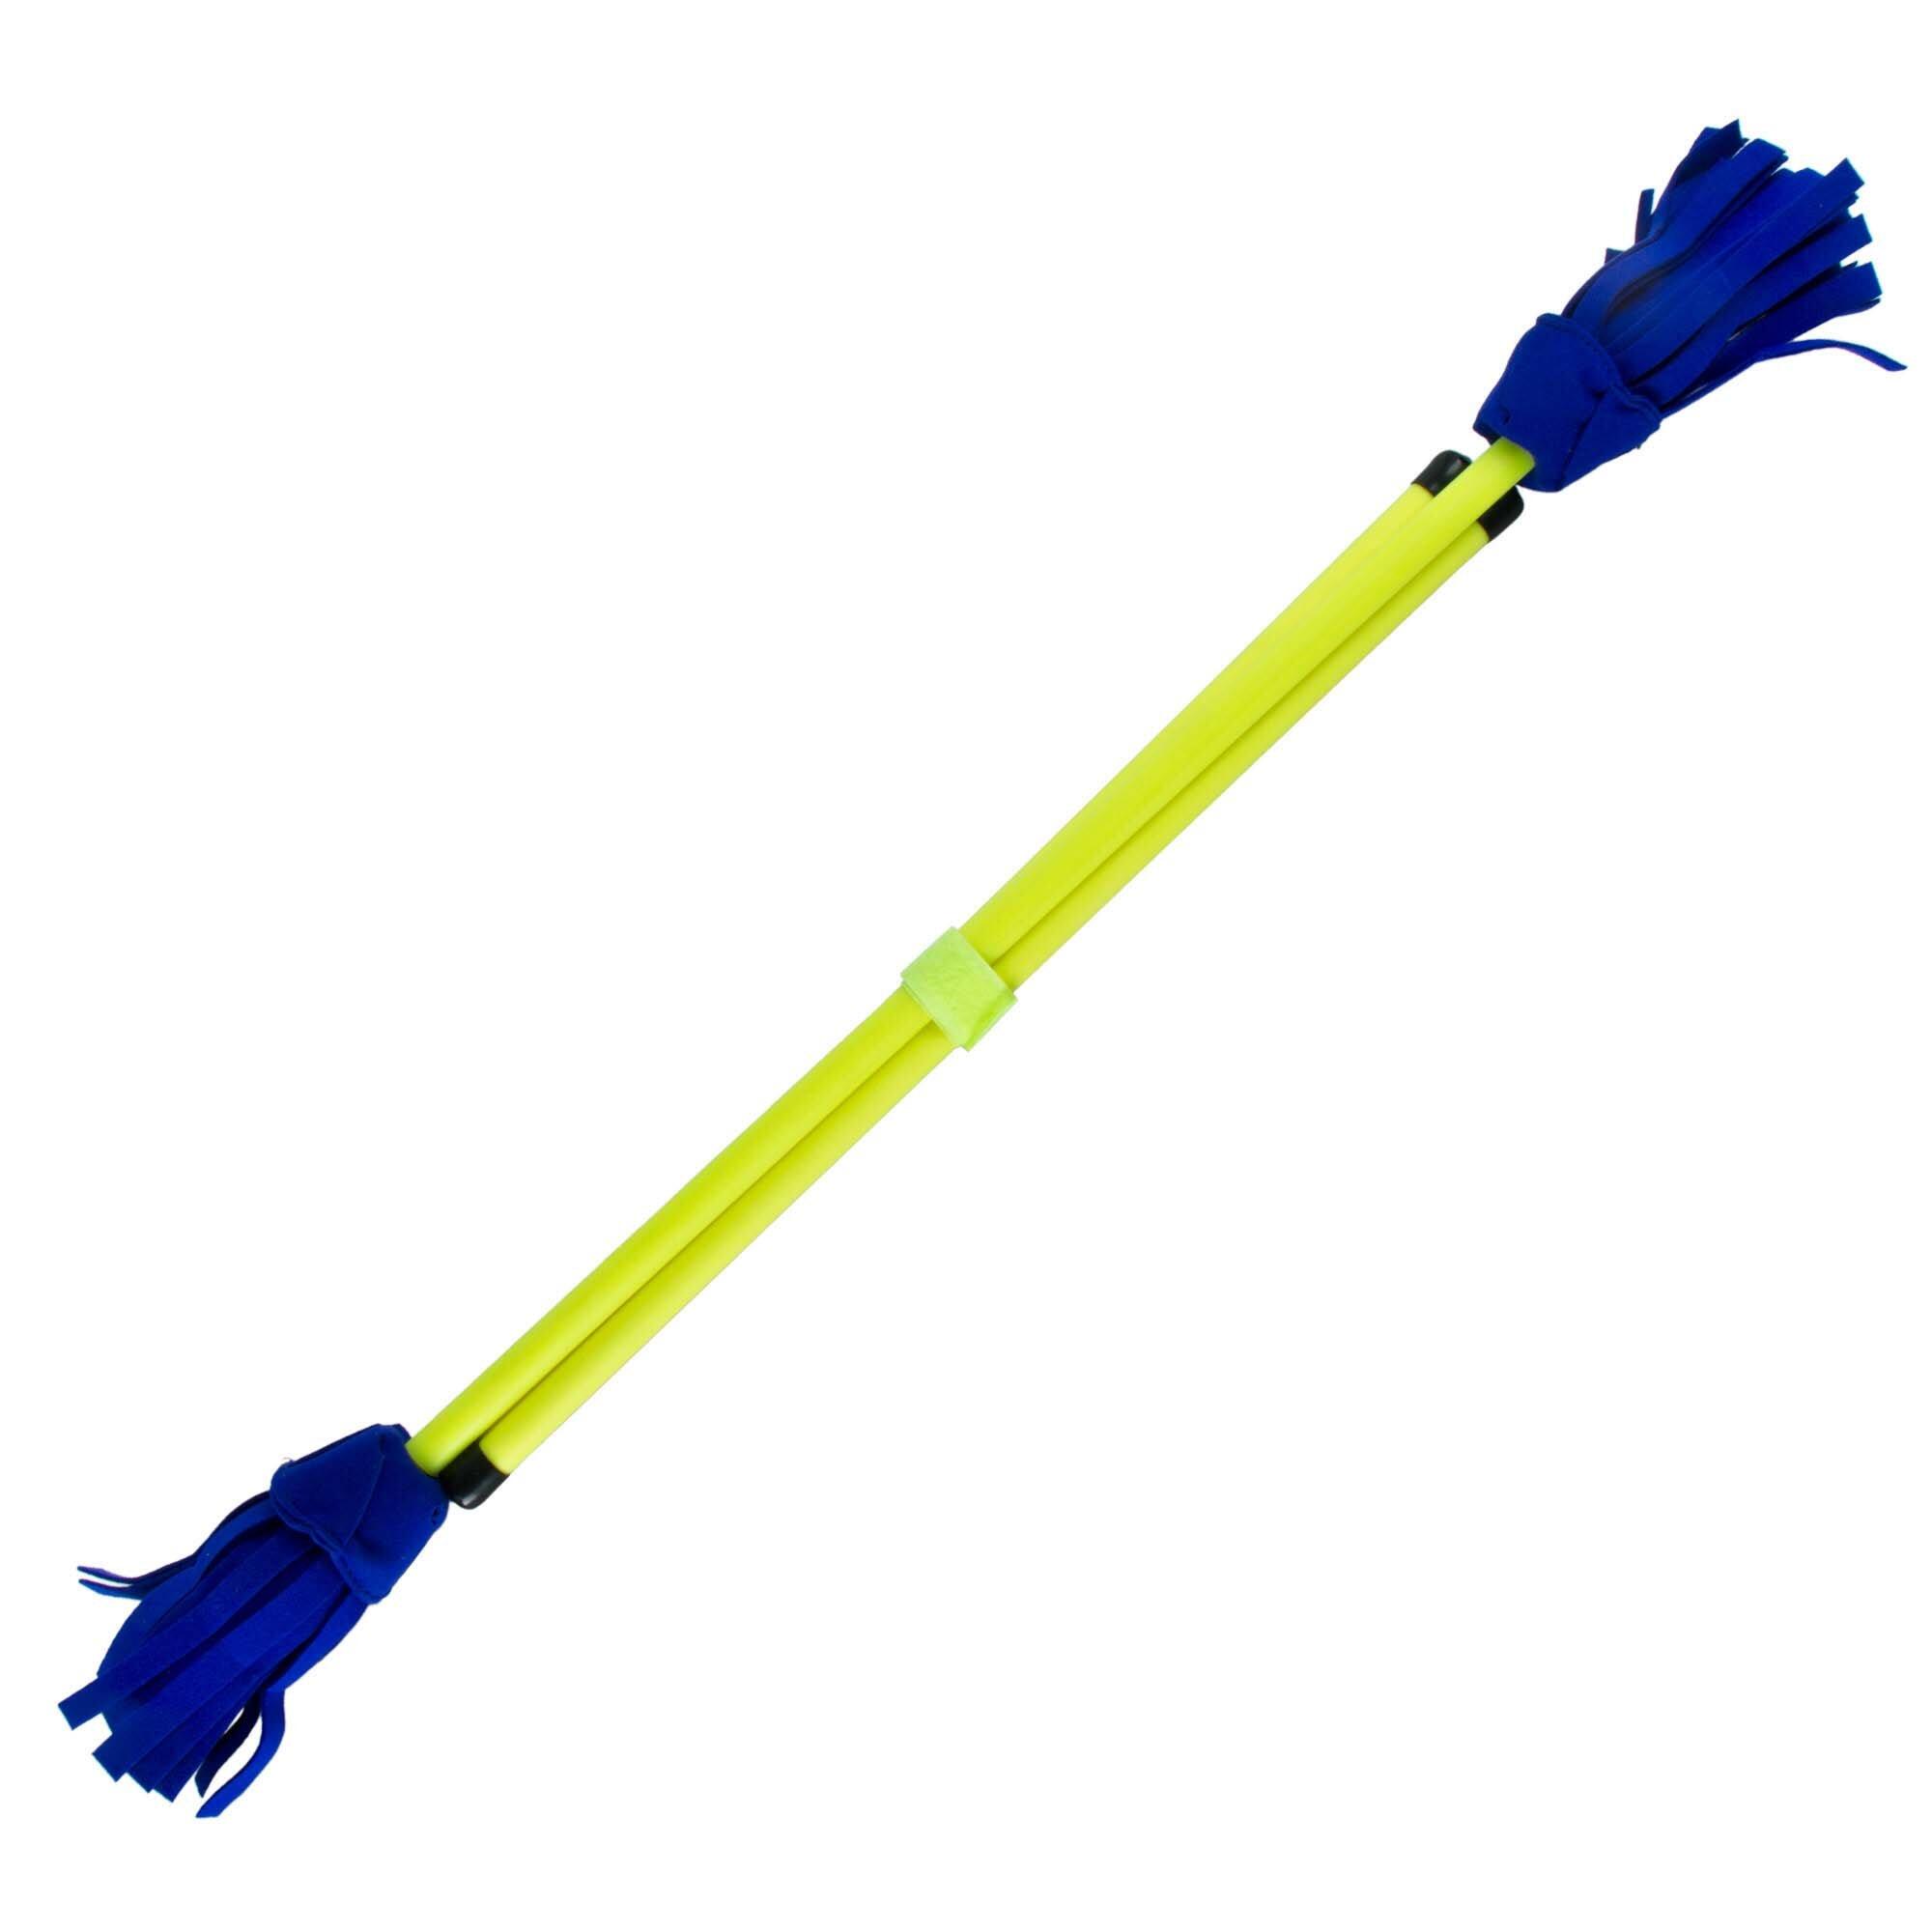 Neo Fluoro Flower Stick and Hand Sticks-Yellow with Blue Tassels 1/3